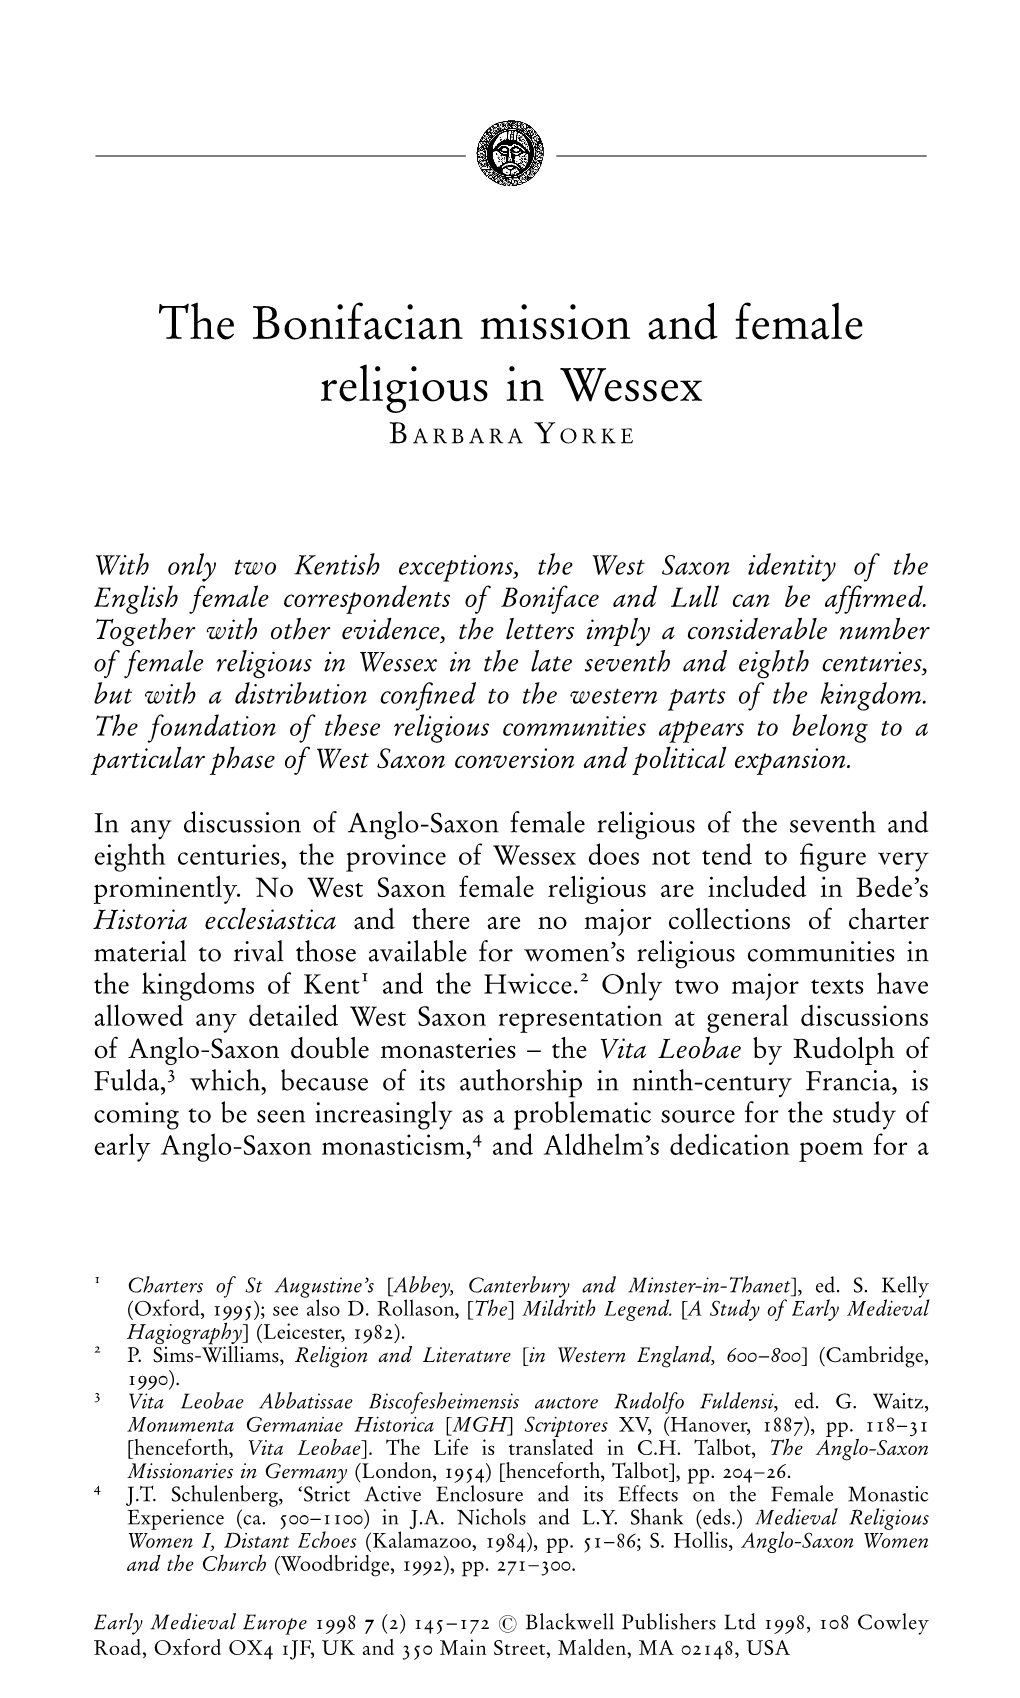 The Bonifacian Mission and Female Religious in Wessex B ARBARA Y ORKE